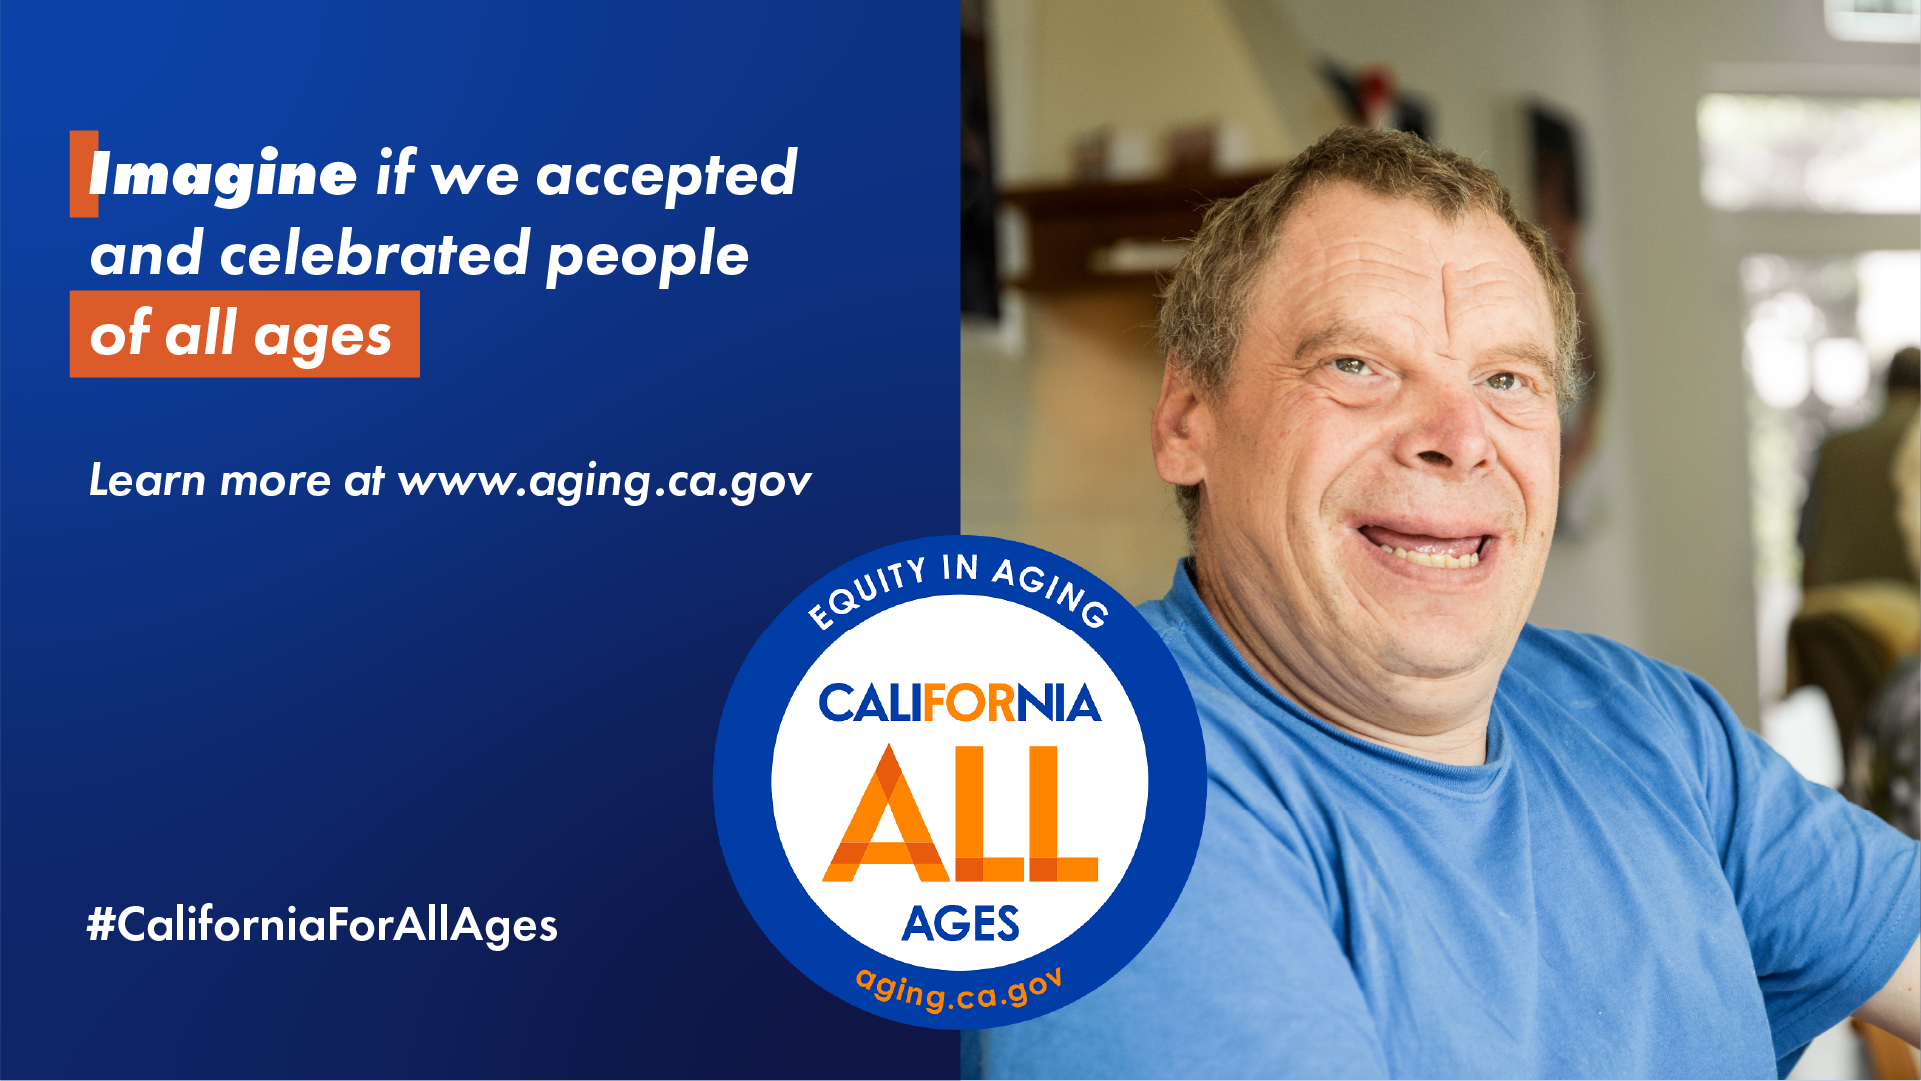 Imagine if we accepted and celebrated people of all ages. Learn more at aging.ca.gov. California For All Ages logo, #CaliforniaForAllAges. Photo of older adult man smiling.